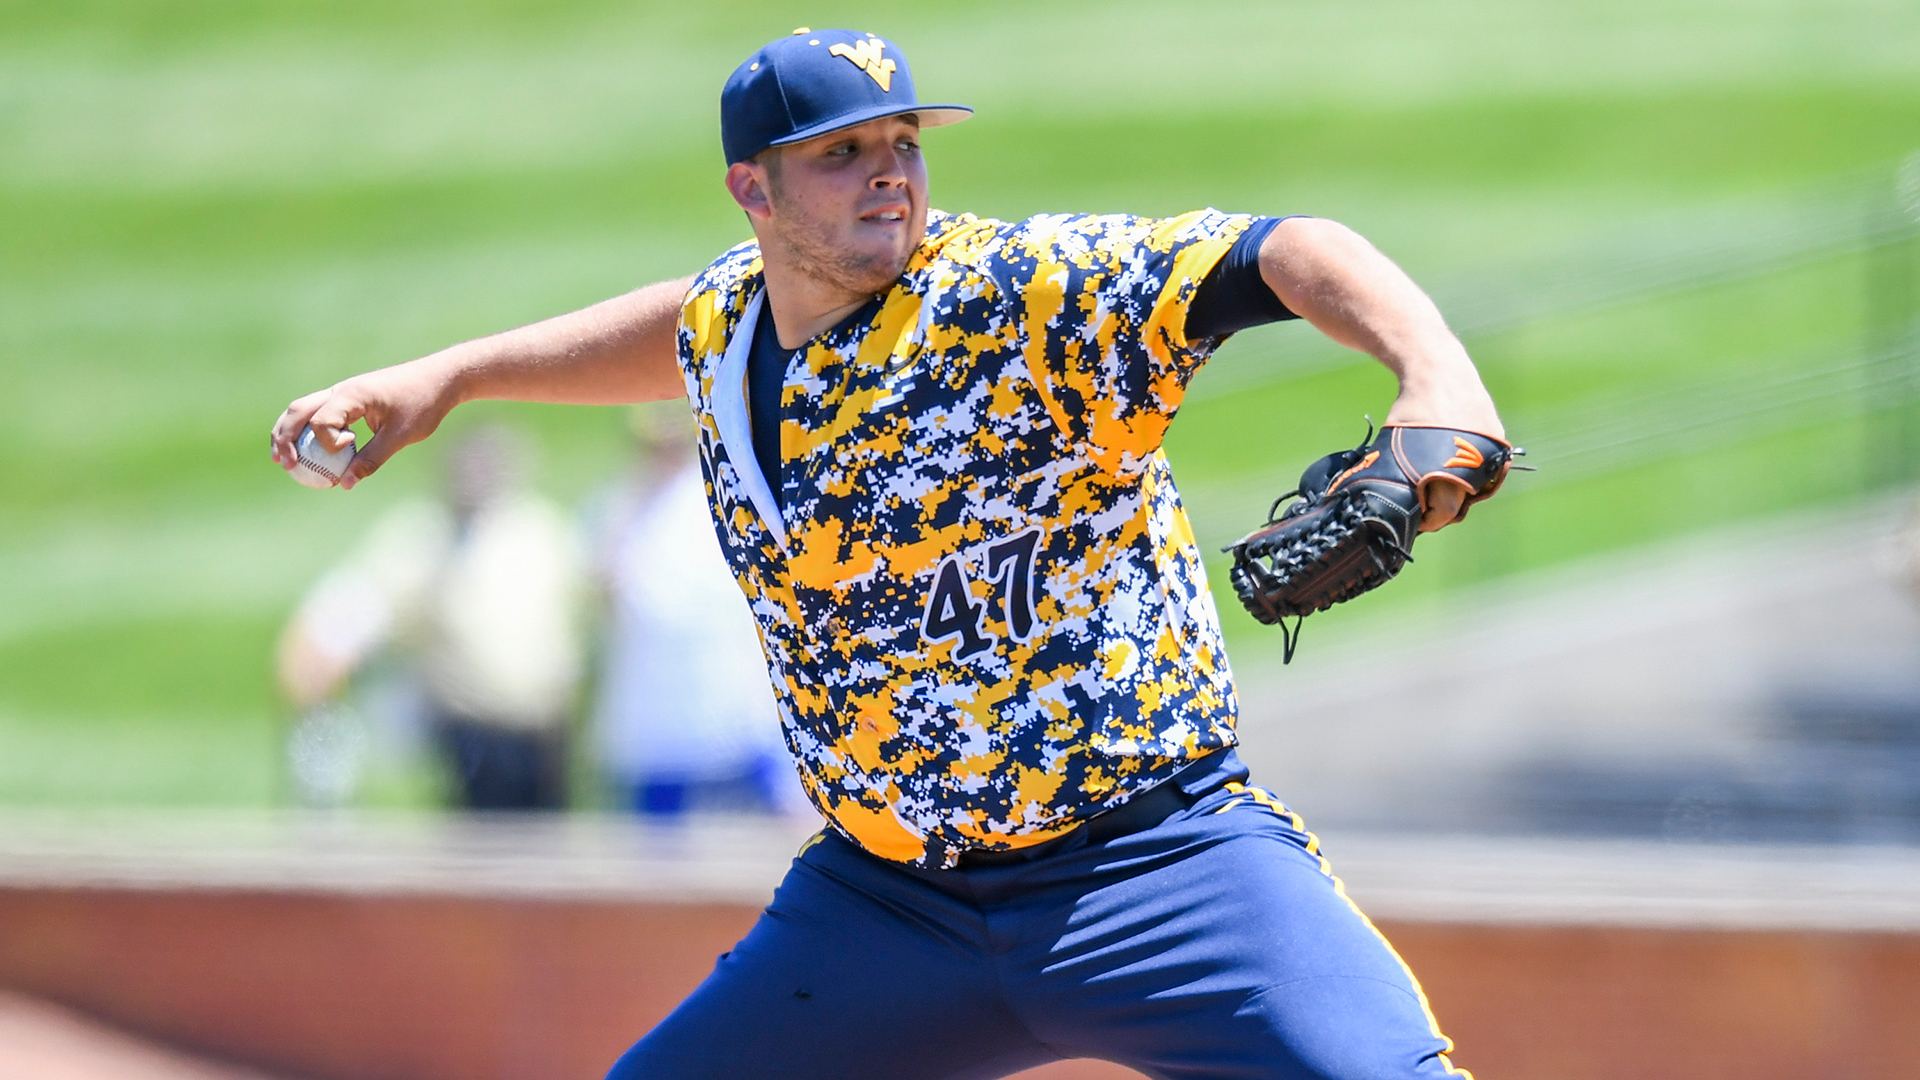 Andrew Vaughn hopes to end Cal's postseason drought - The 3rd Man In - The  3rd Man In